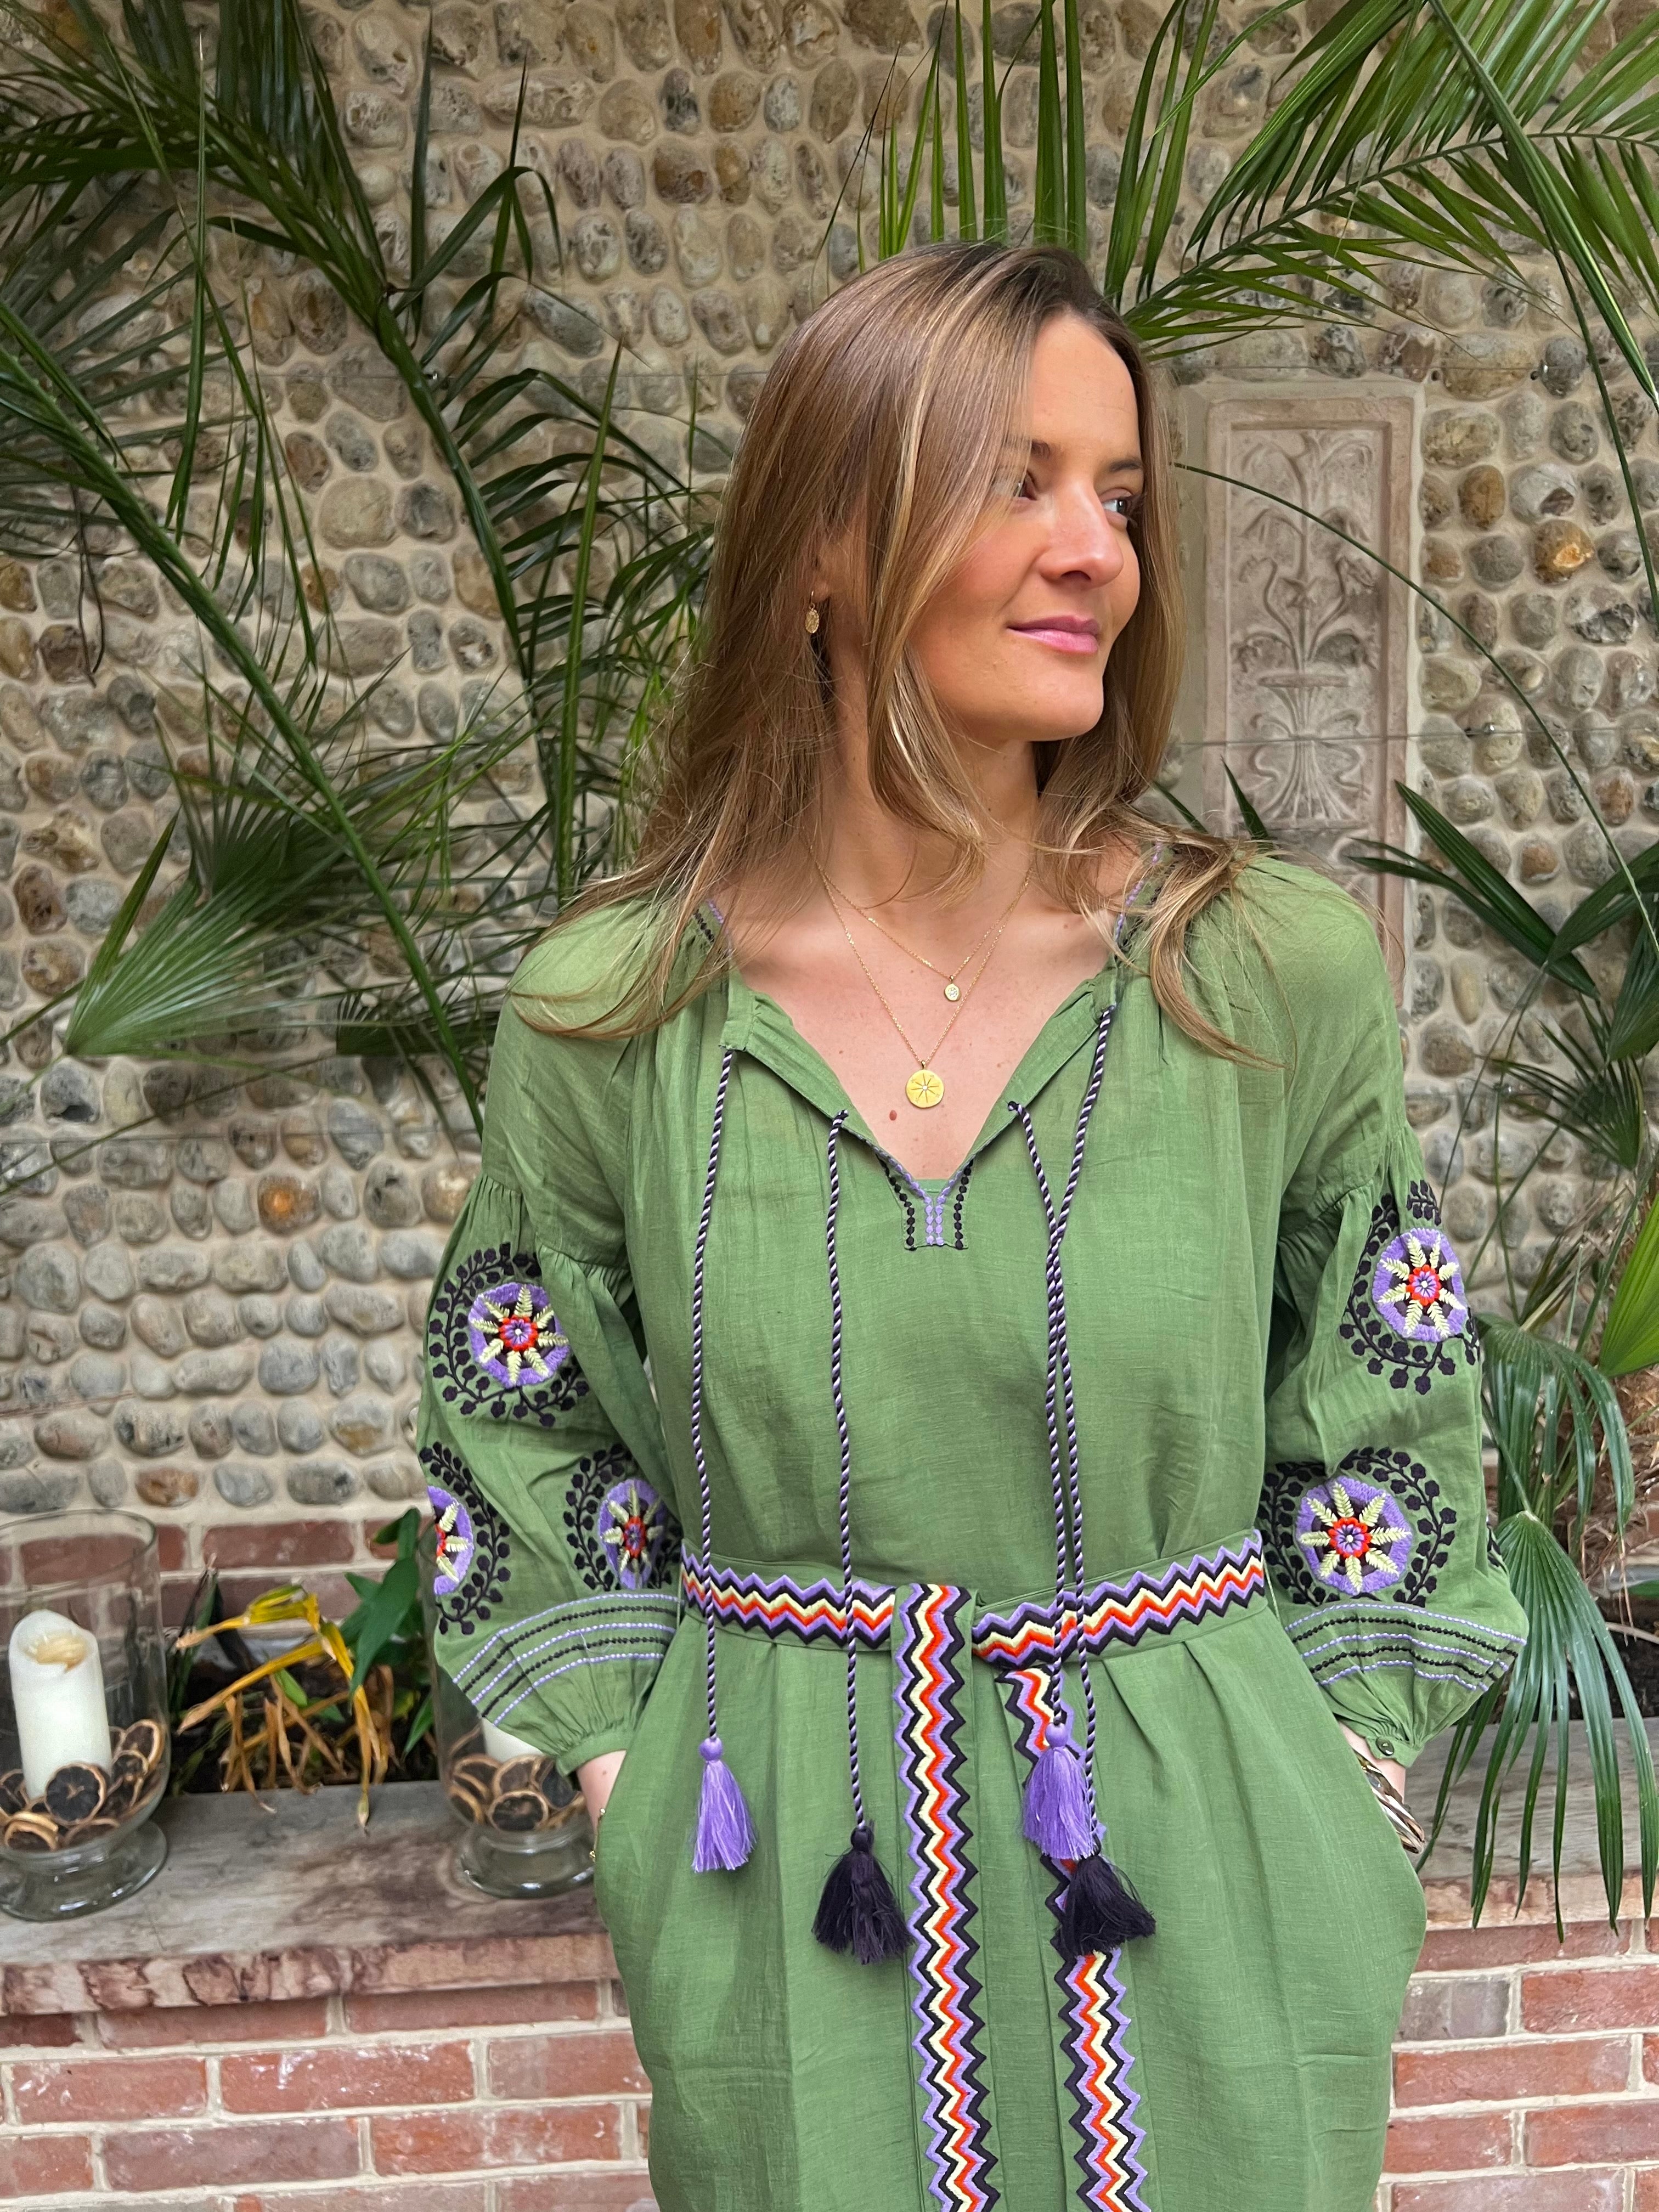 olive green embroidered kaftan or dress with purple and red flower embroidery